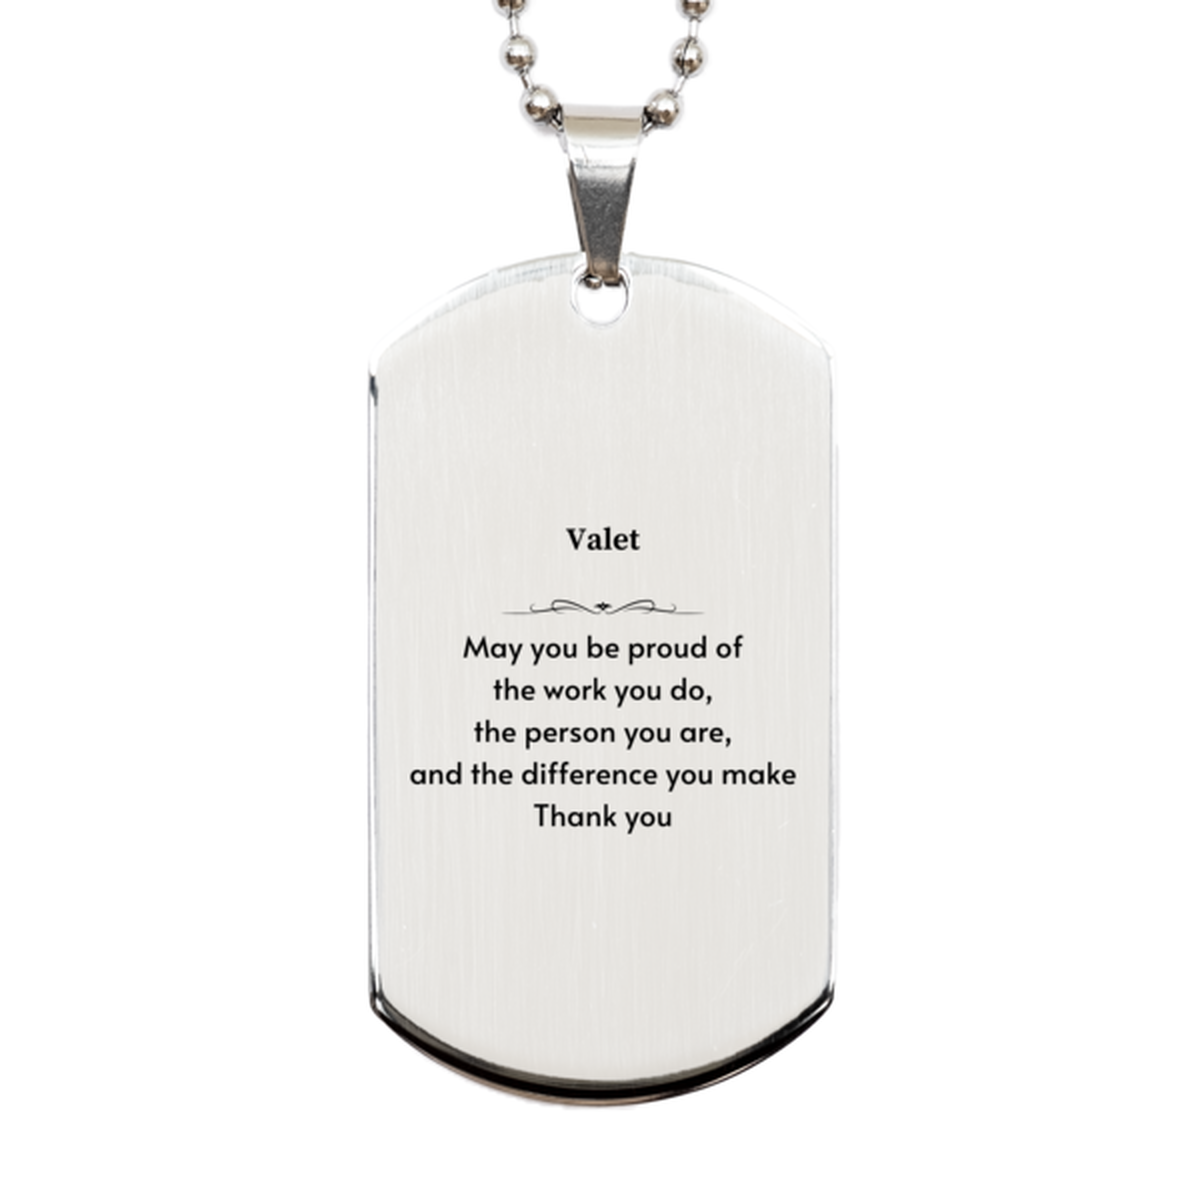 Heartwarming Silver Dog Tag Retirement Coworkers Gifts for Valet, Valet May You be proud of the work you do, the person you are Gifts for Boss Men Women Friends